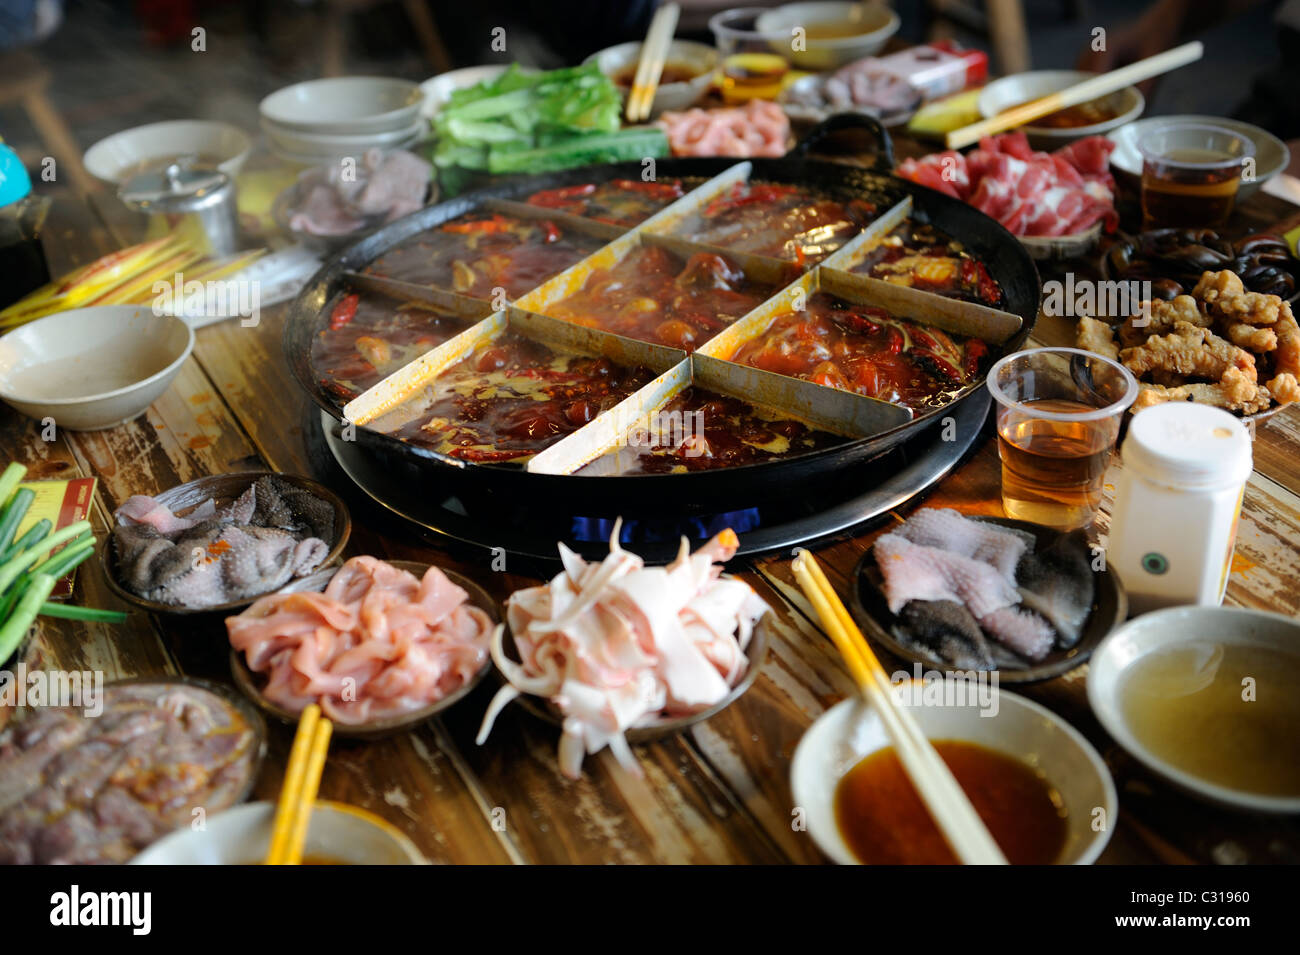 Chinese Hot Pot in New York: Chongqing-Style Hot Pot Is on the